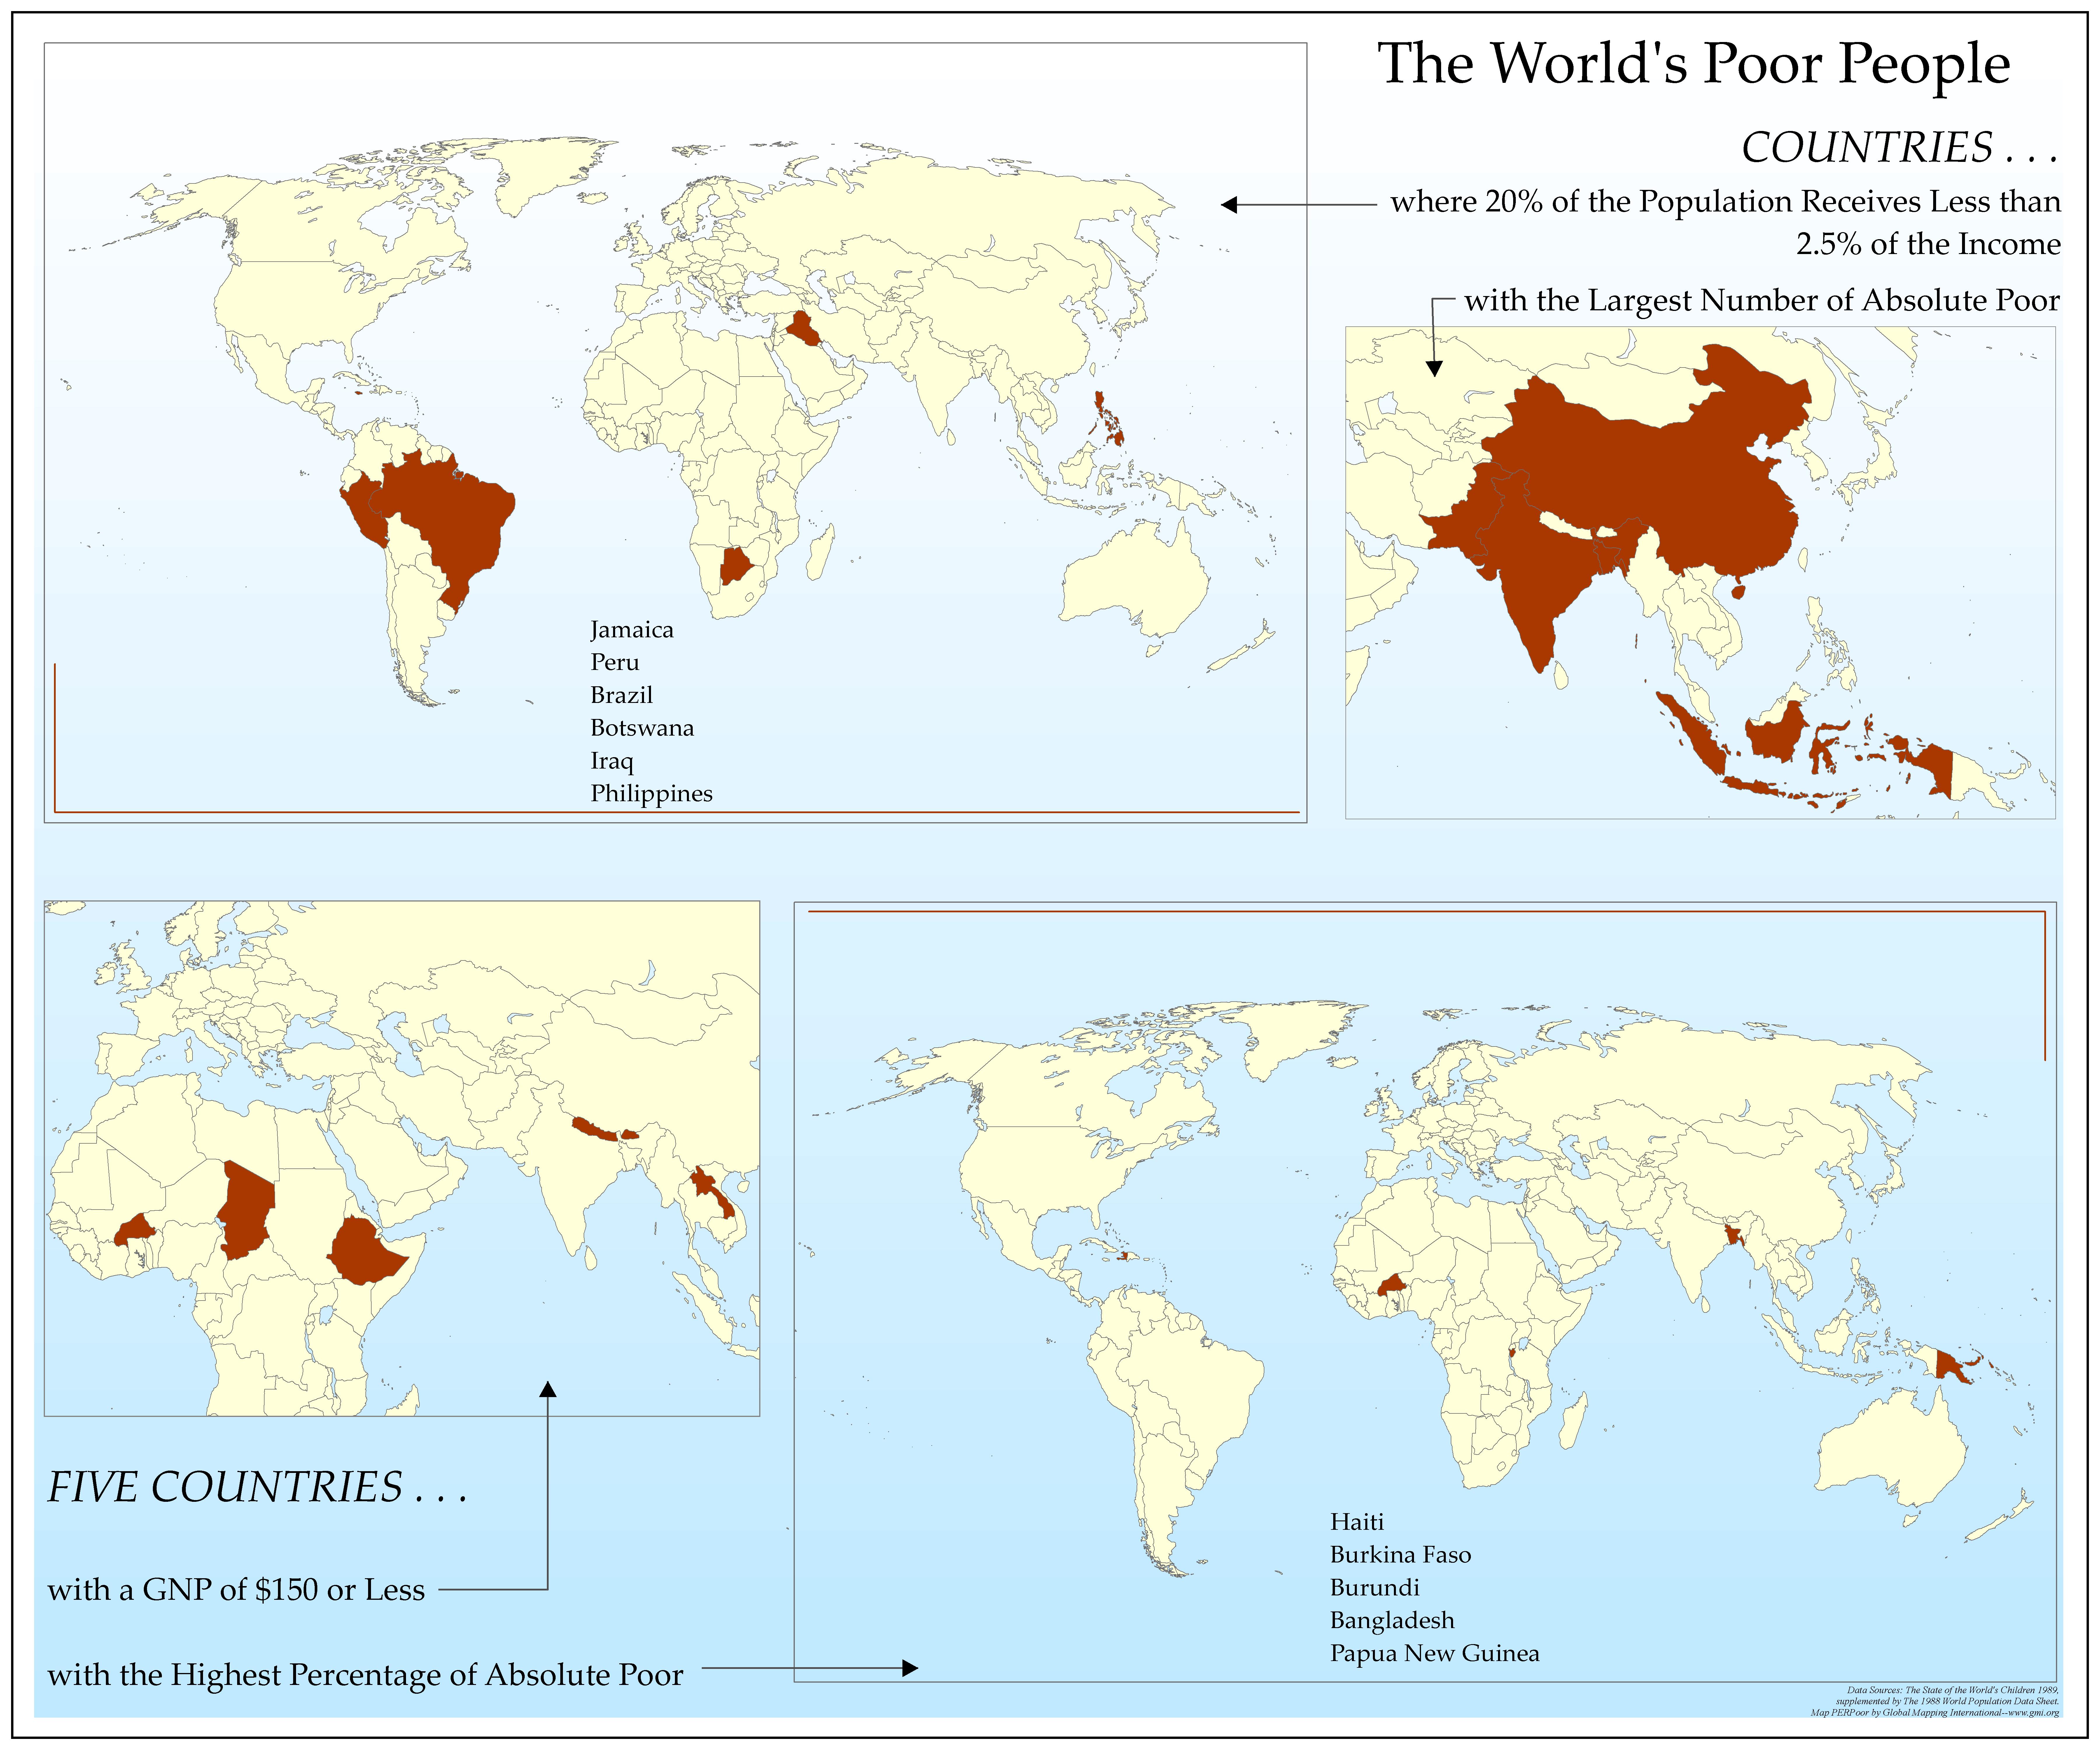 The World's Poor People